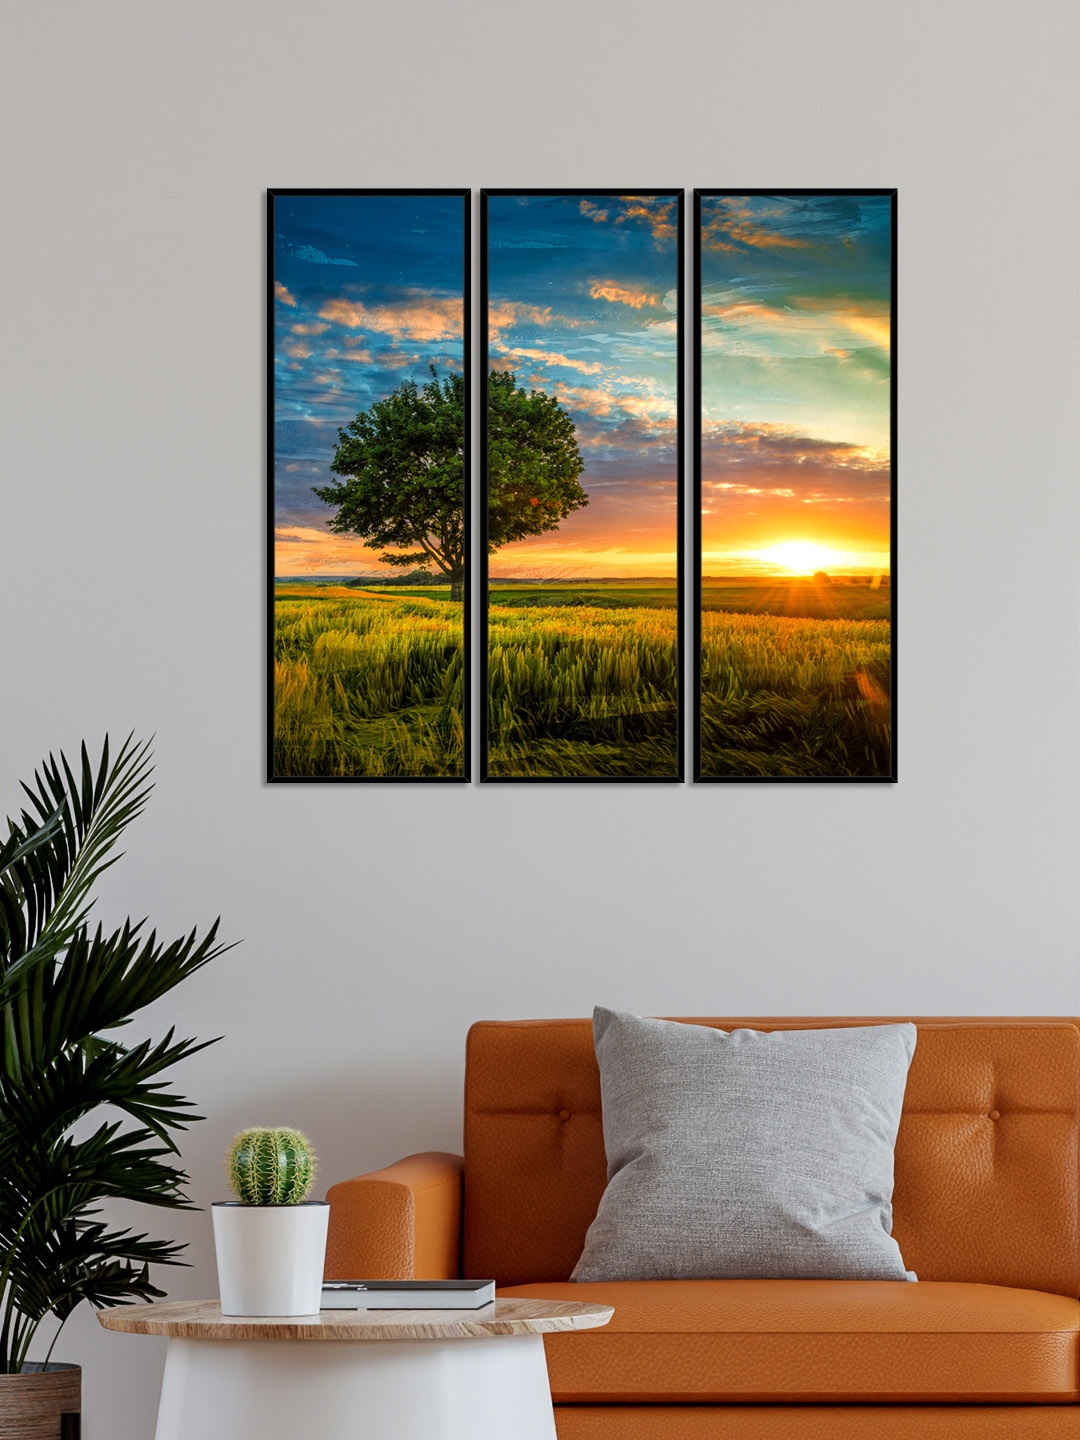 Buy 999Store Set Of 3 Multi Coloured Tree With Sunset Nature Printed ...